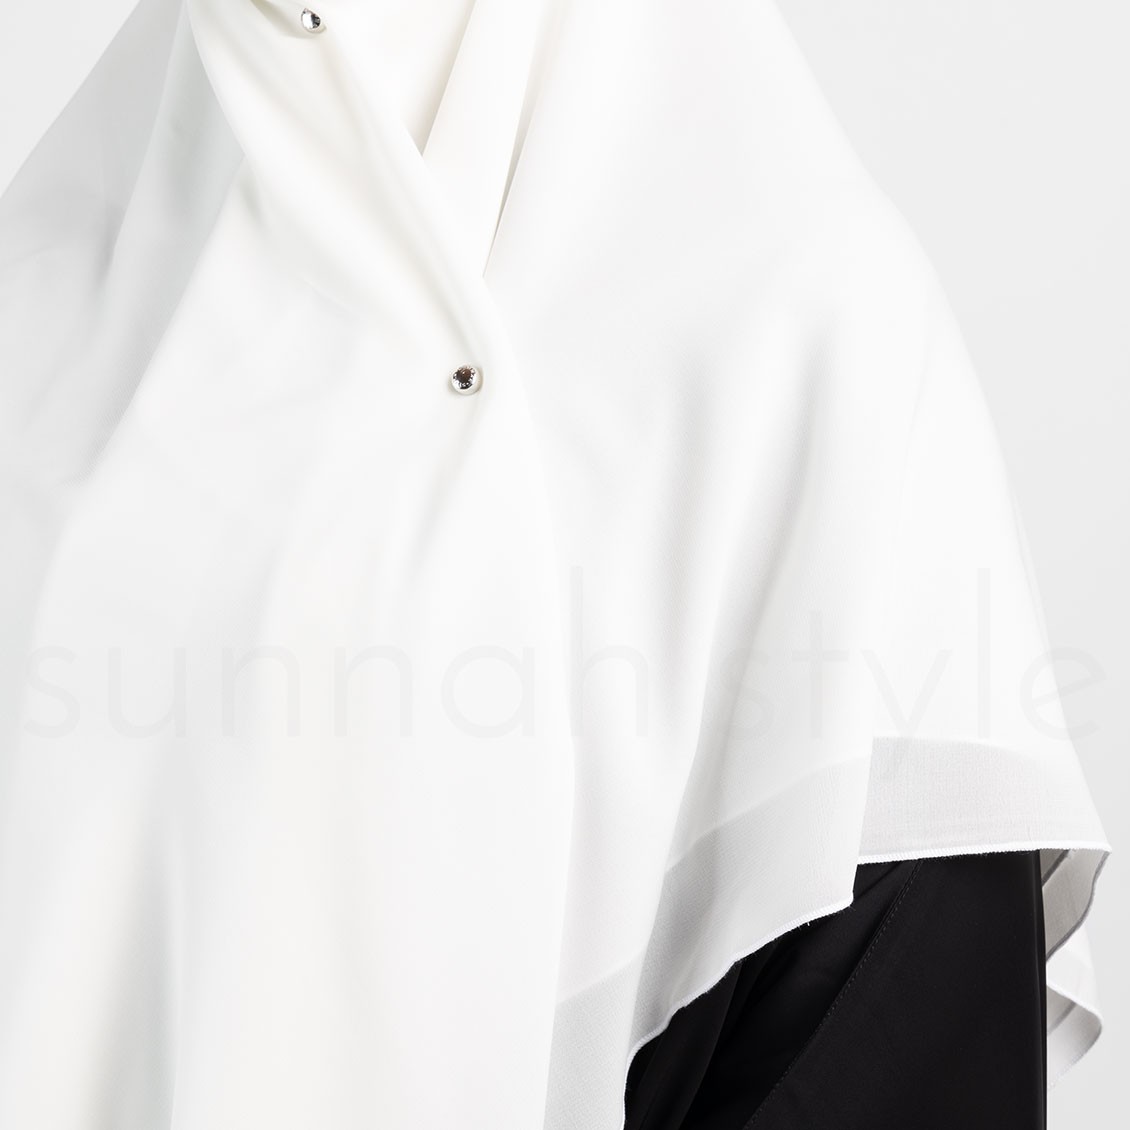 Sunnah Style Essentials Square Hijab Large White